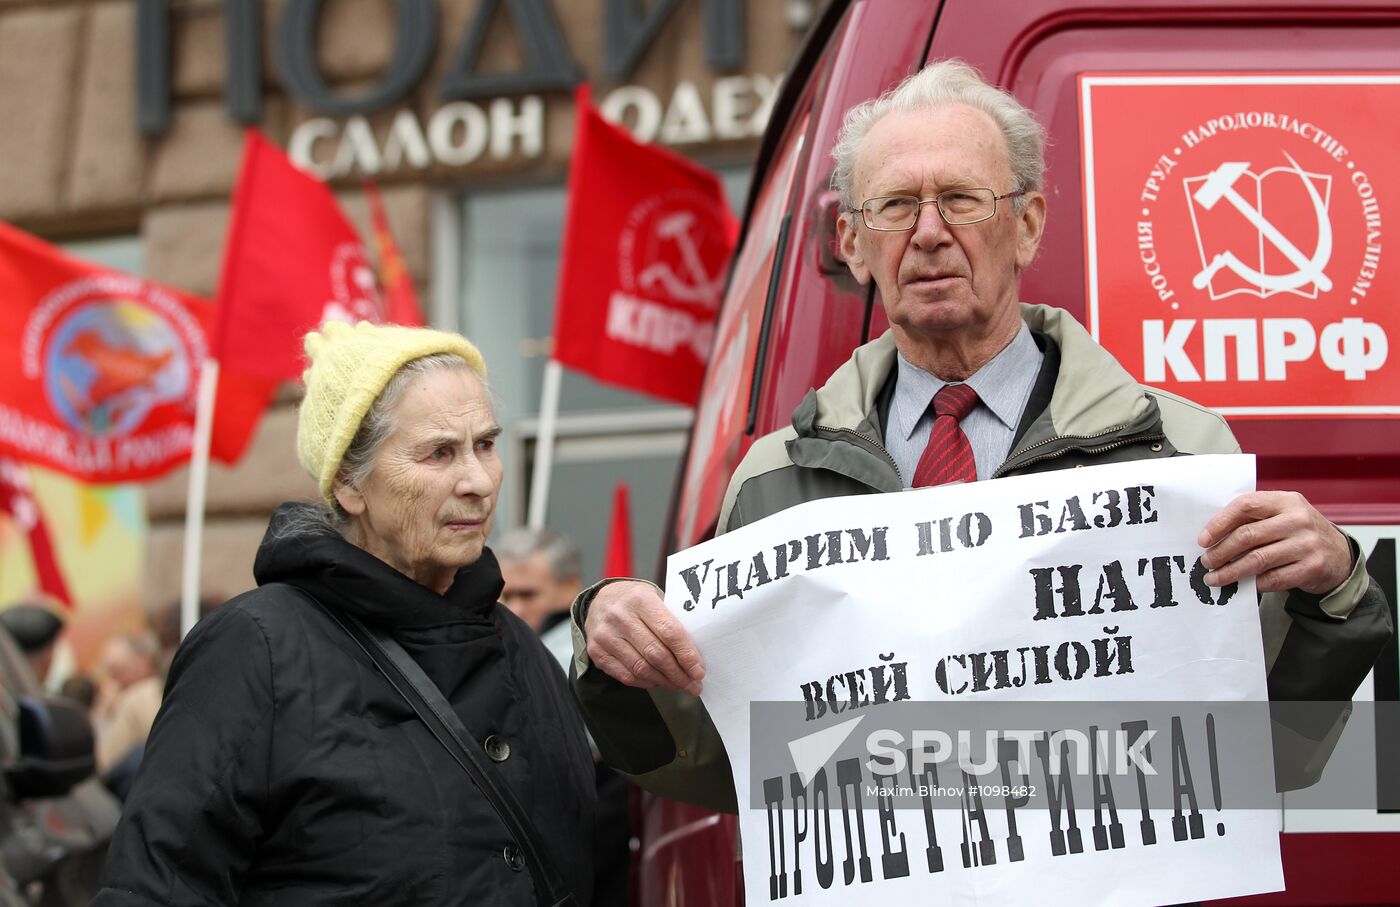 Communist party picket against NATO near U.S. embassy in Moscow